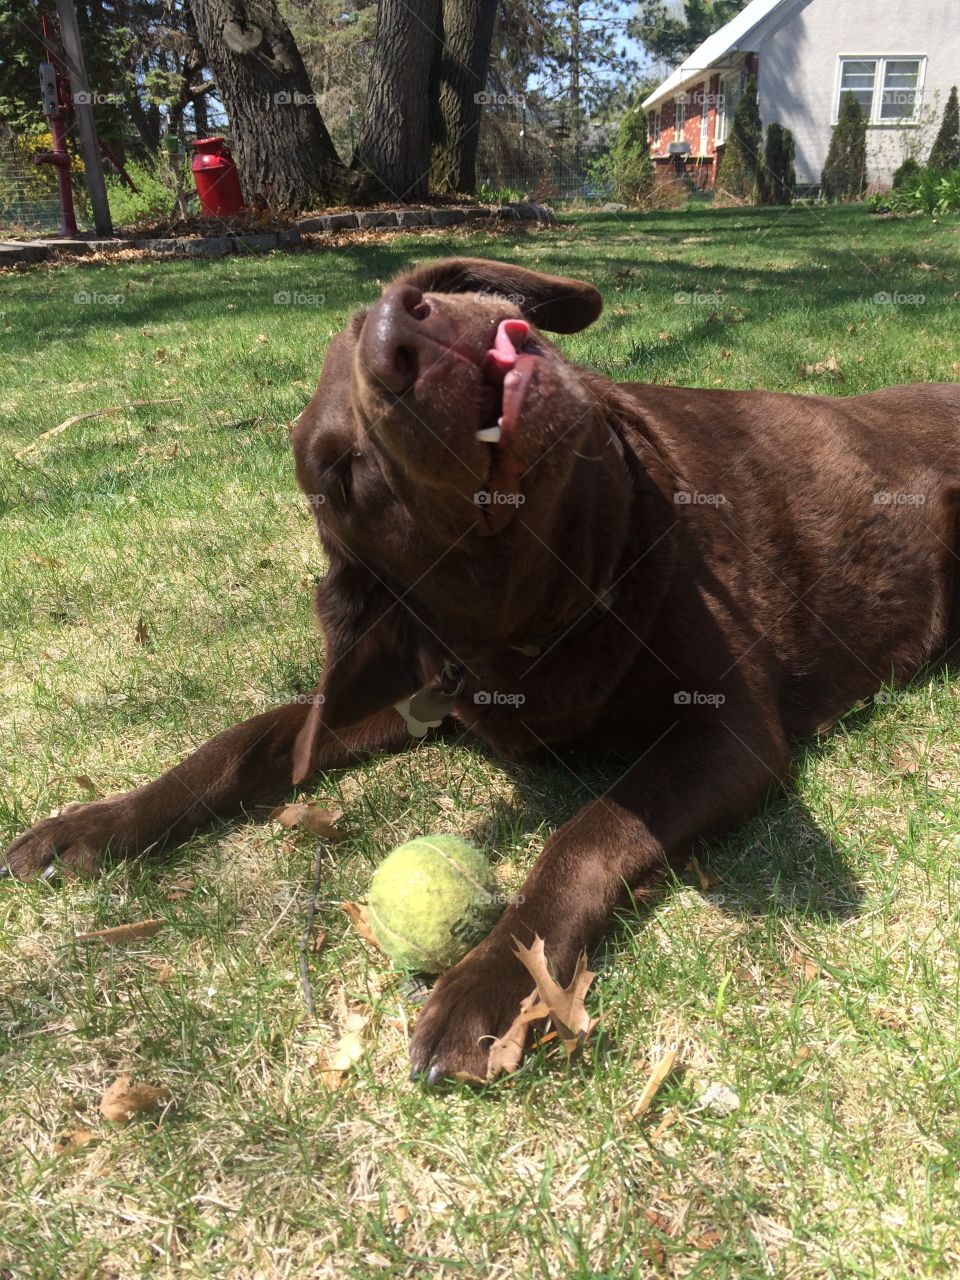 My crazy chocolate lab taking a break from playing fetch.